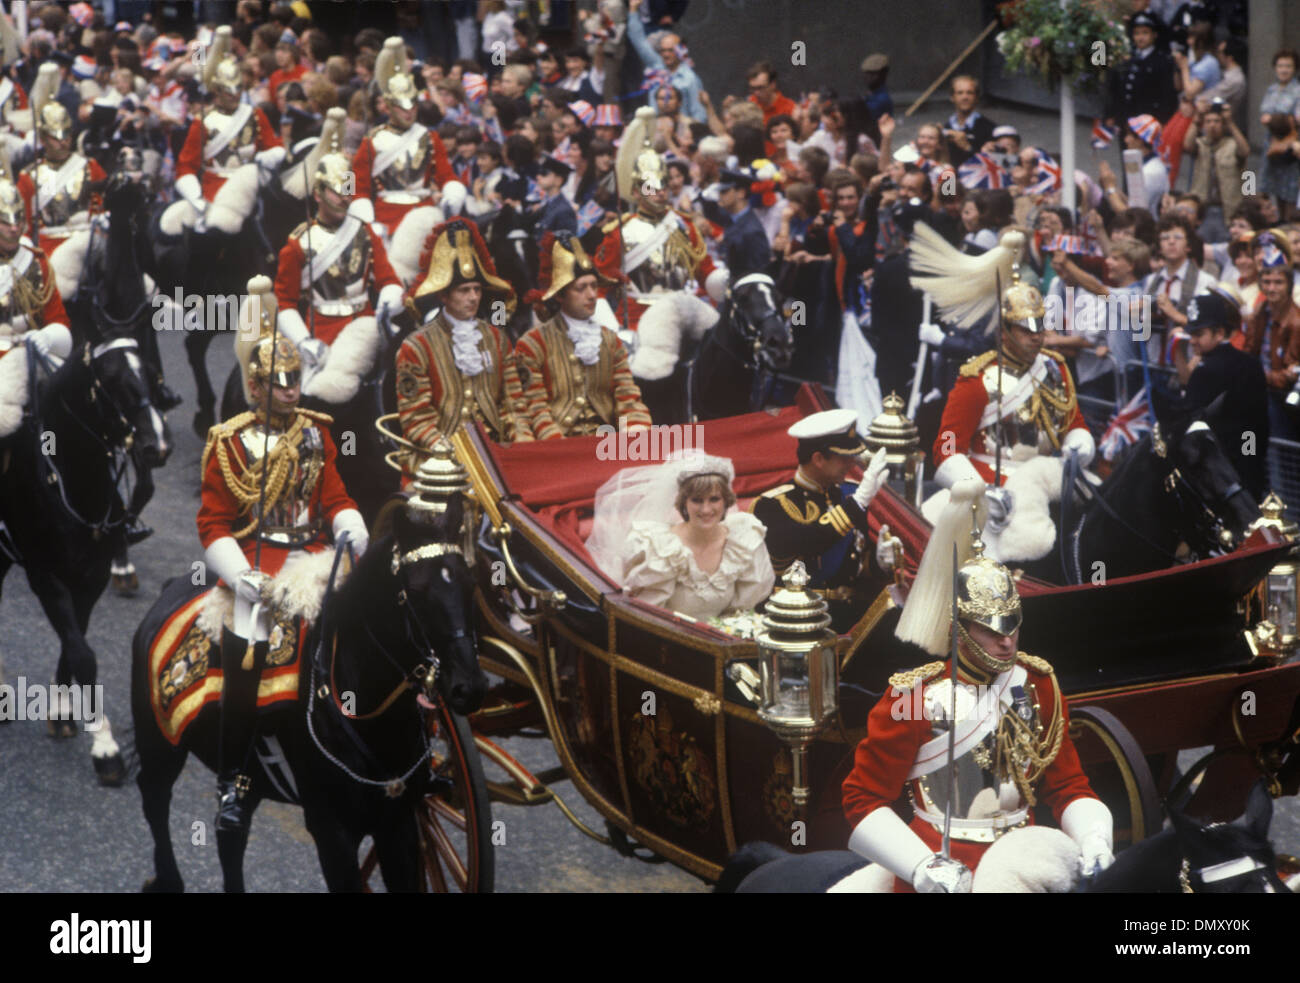 Prince Charles Diana wedding crowds London. Royal wedding Prince Charles and Lady Diana Spencer  29th July 1981 open carriage down The Mall after the ceremony, returning to Buckingham Palace, waving to crowd Diana smiling. 1980s UK HOMER SYKES Stock Photo